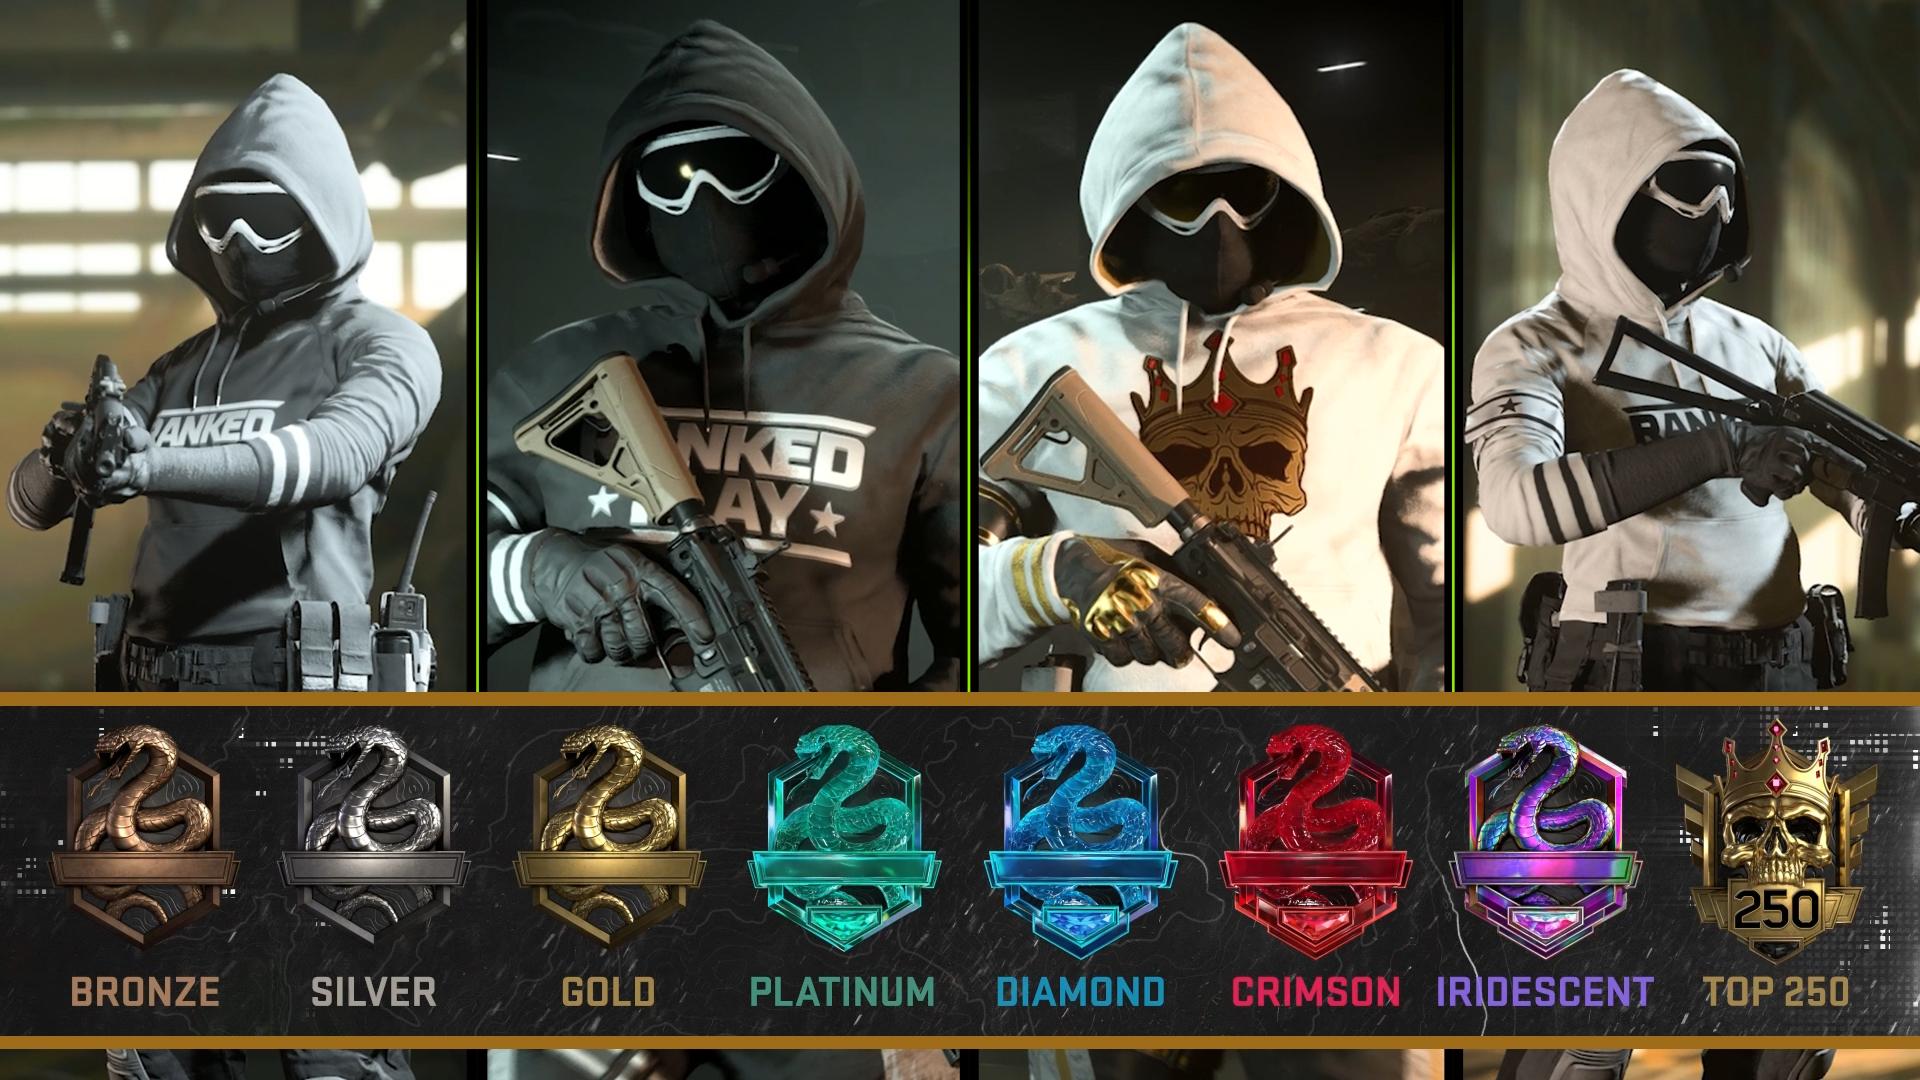 The ranks available in Warzone Ranked Play.